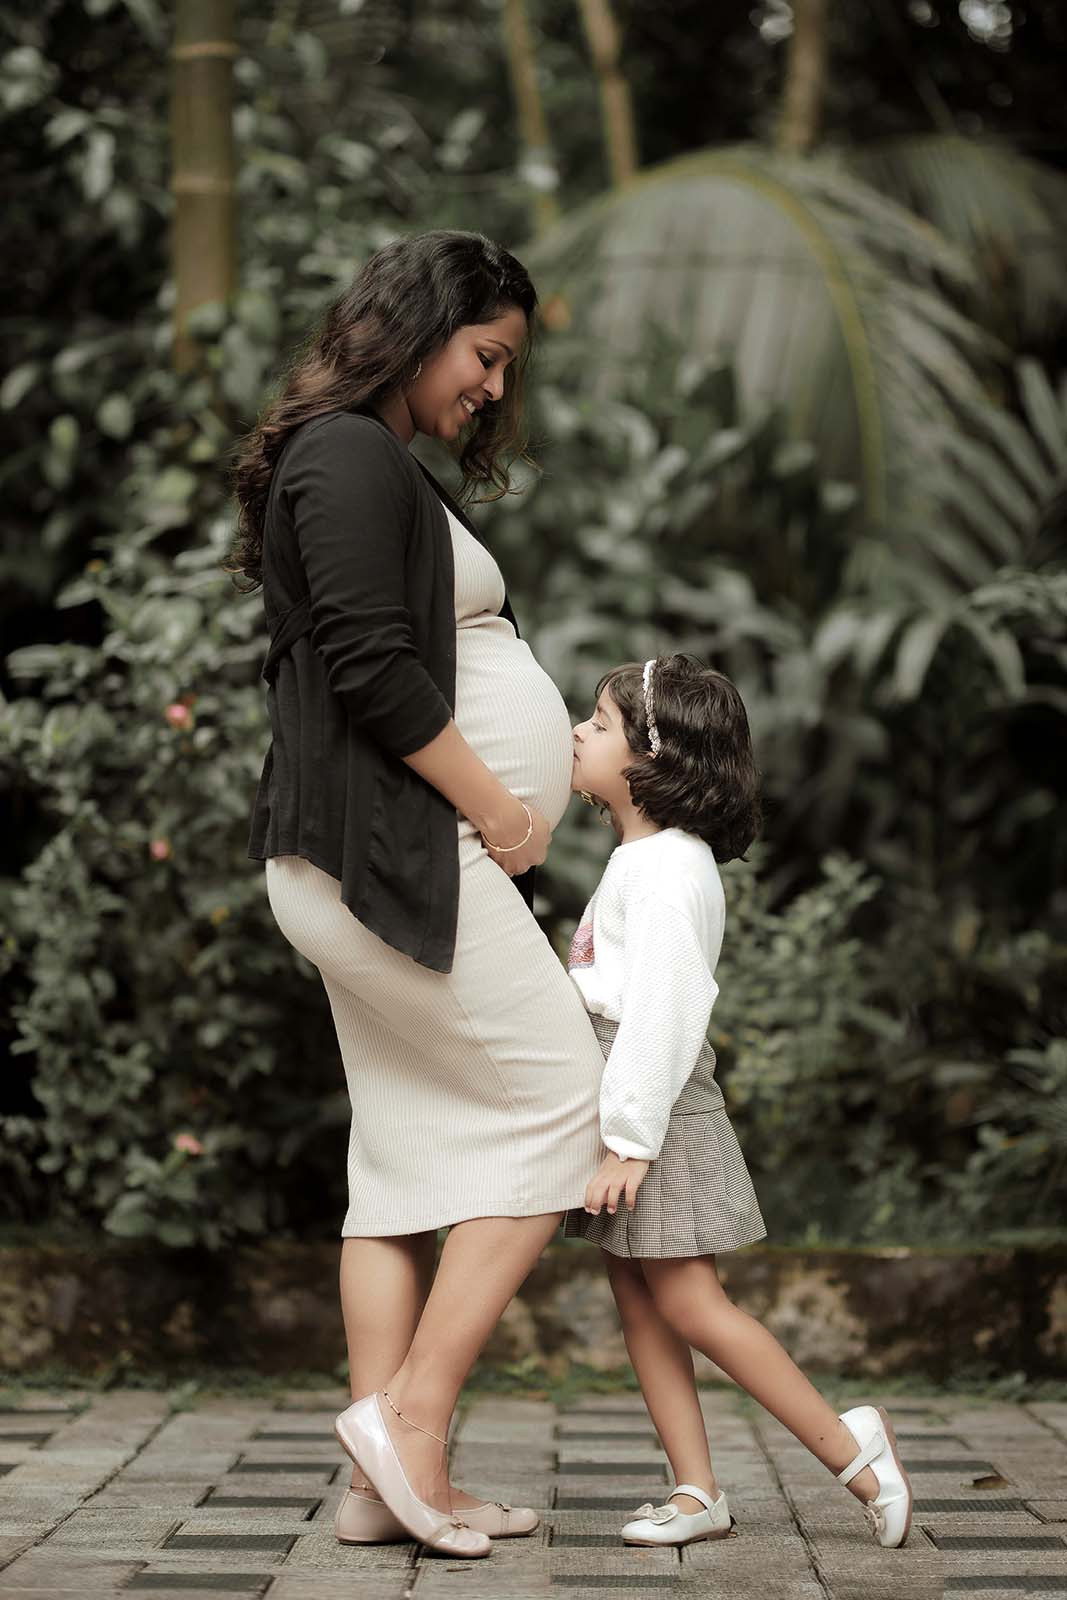 surrogate mother cradles her pregnant belly while her daughter leans in to kiss her mother’s growing baby bump. They are surrounded by luscious tropical plants and greenery.